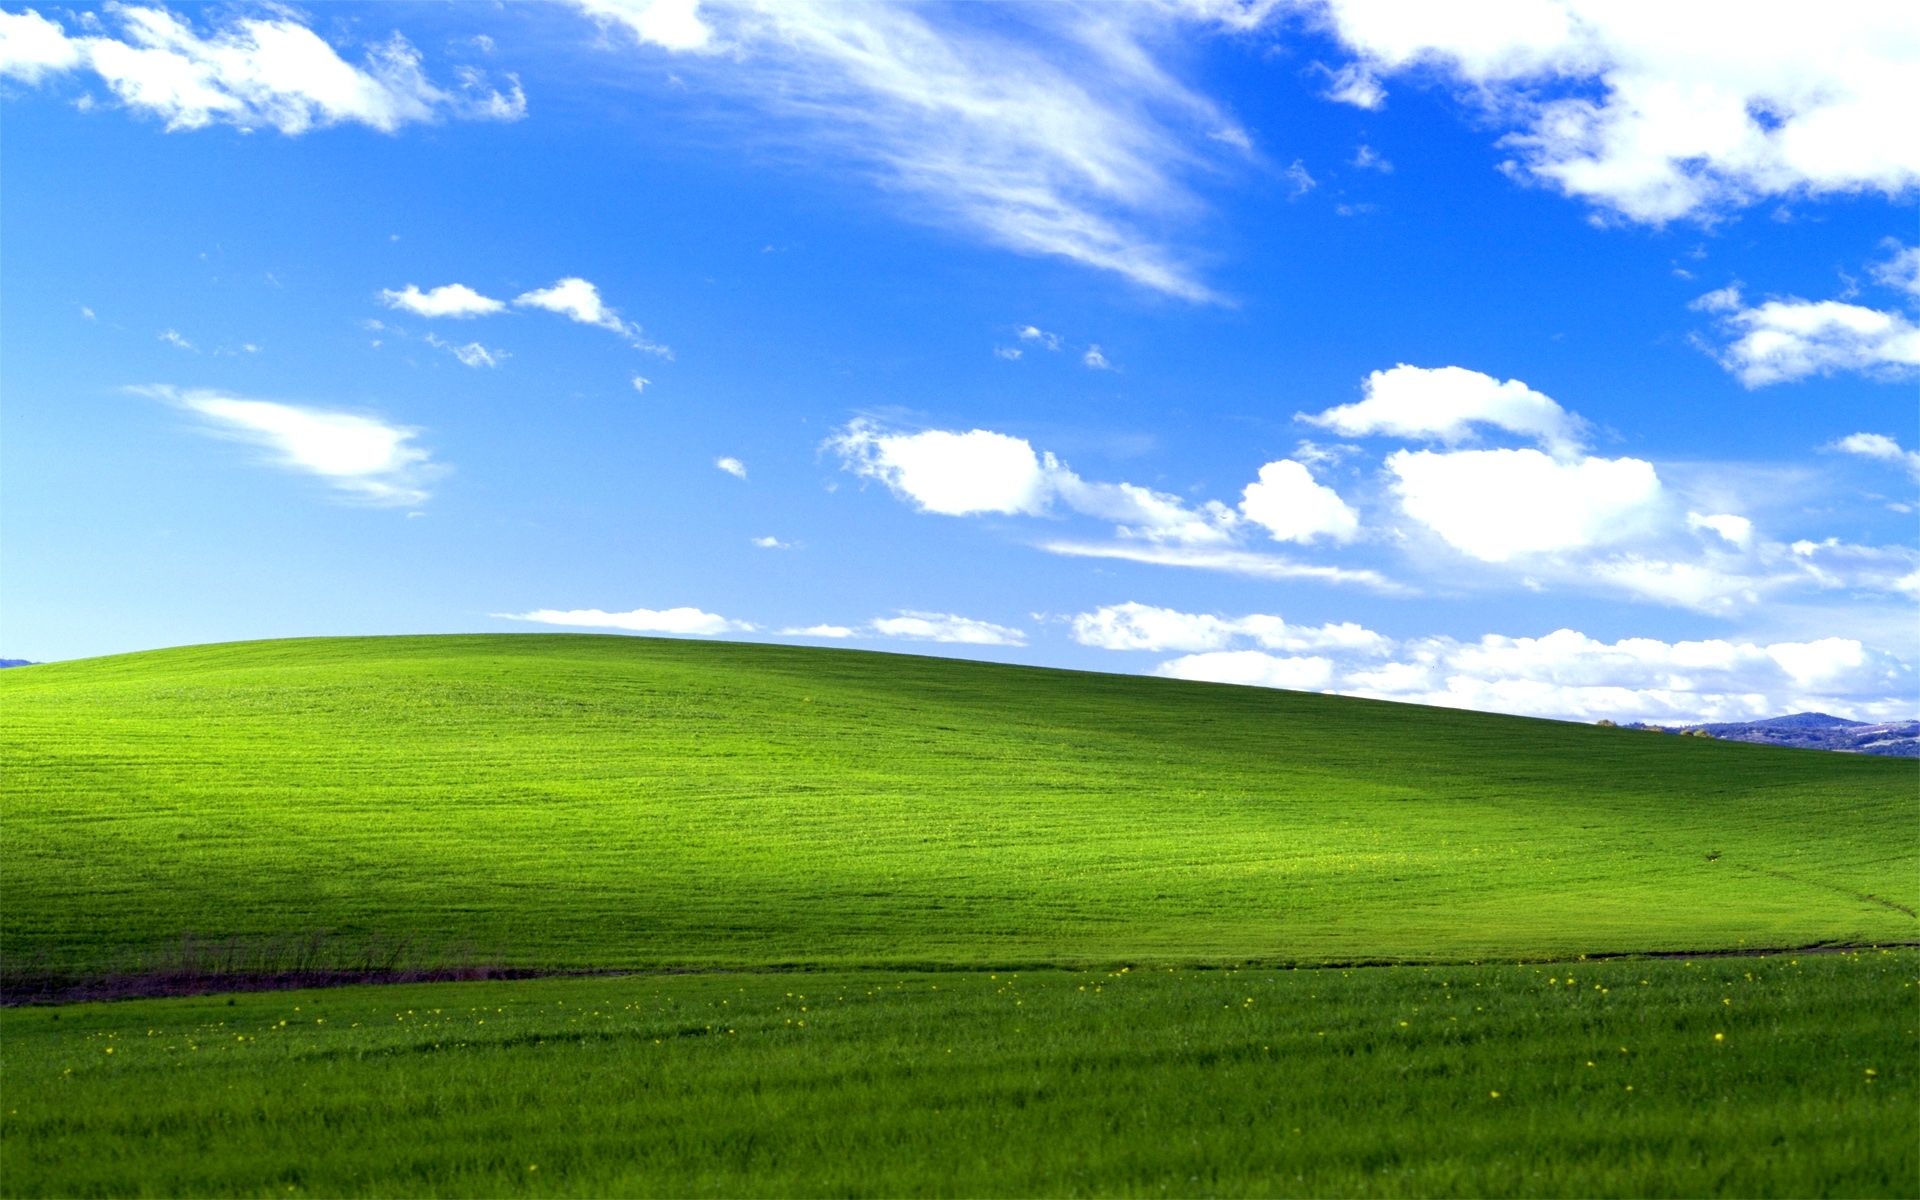 10 New Windows Xp Background Hd FULL HD 1080p For PC Background